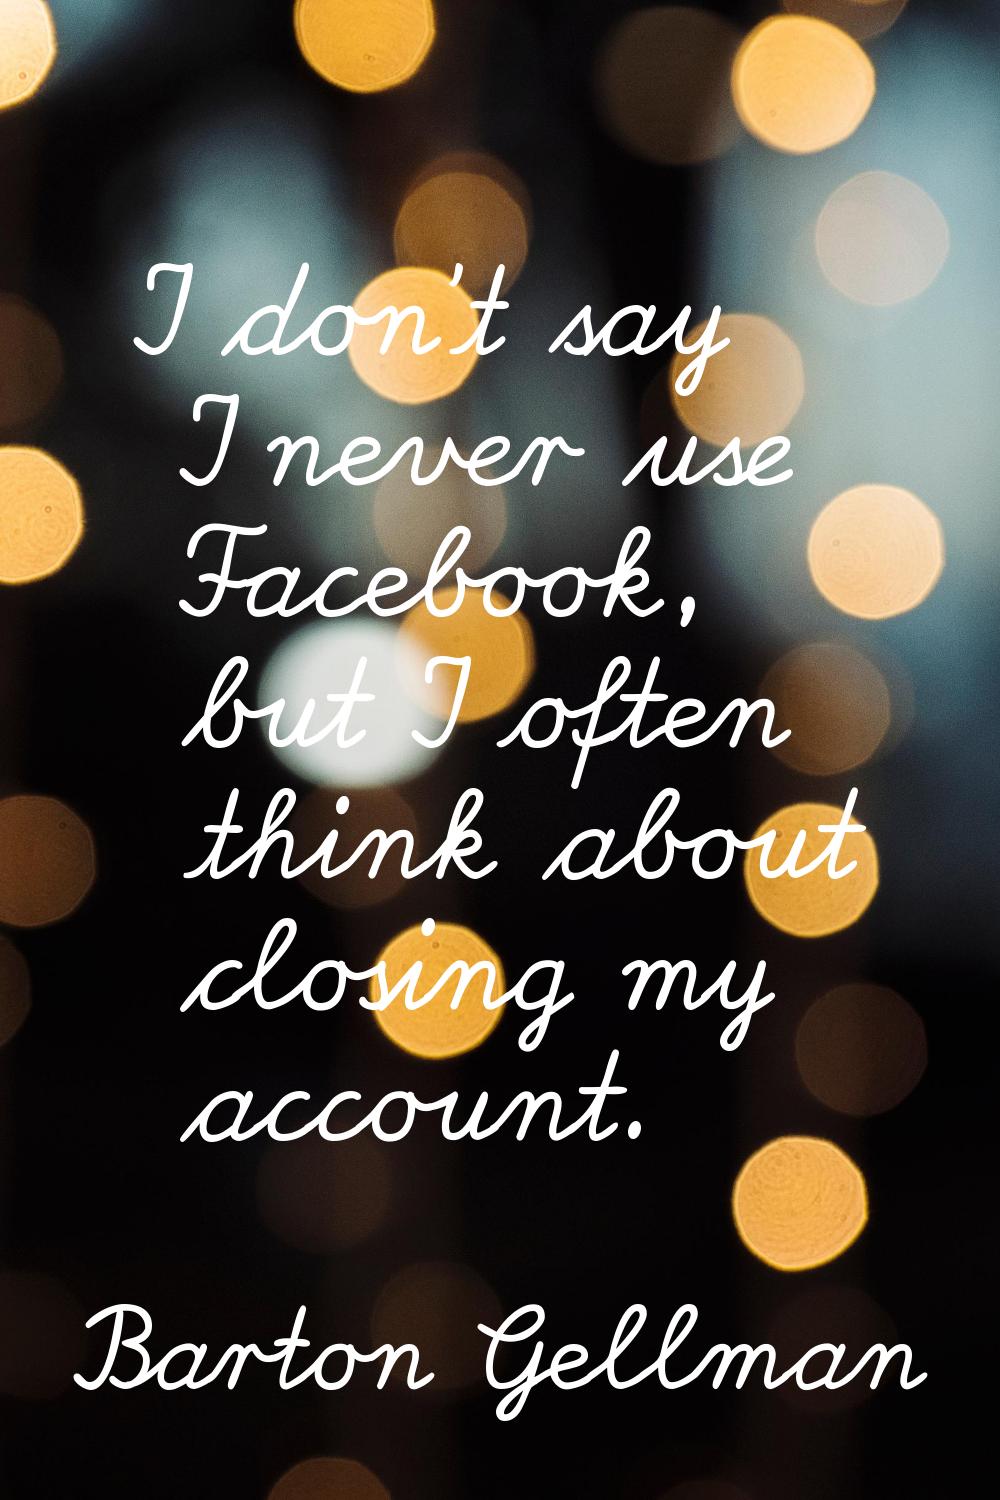 I don't say I never use Facebook, but I often think about closing my account.